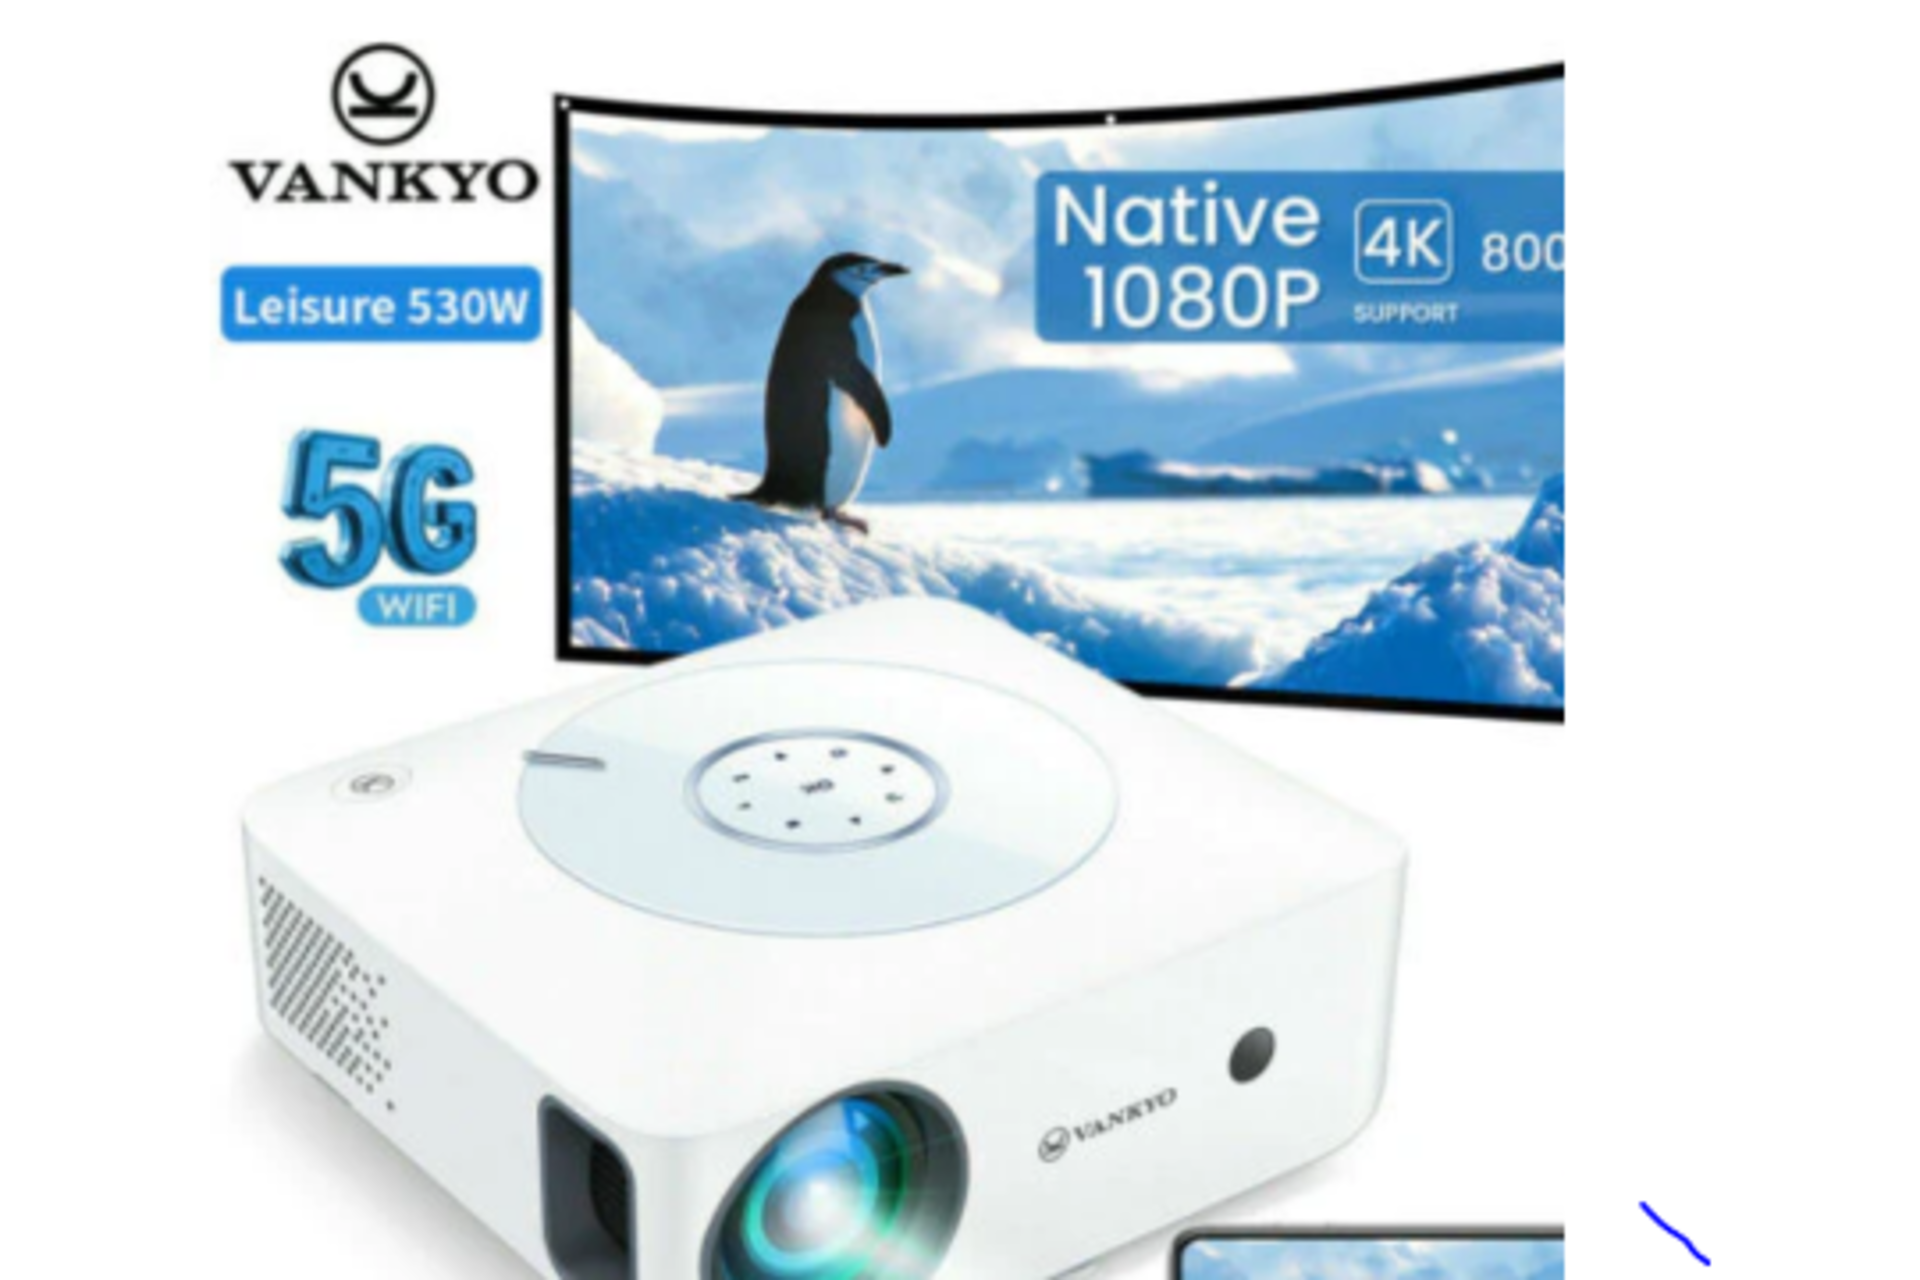 New Boxed VANKYO LEISURE 530W Native 1080P Full HD Video Projector 5G WiFi iOS & Android. RRP £279.